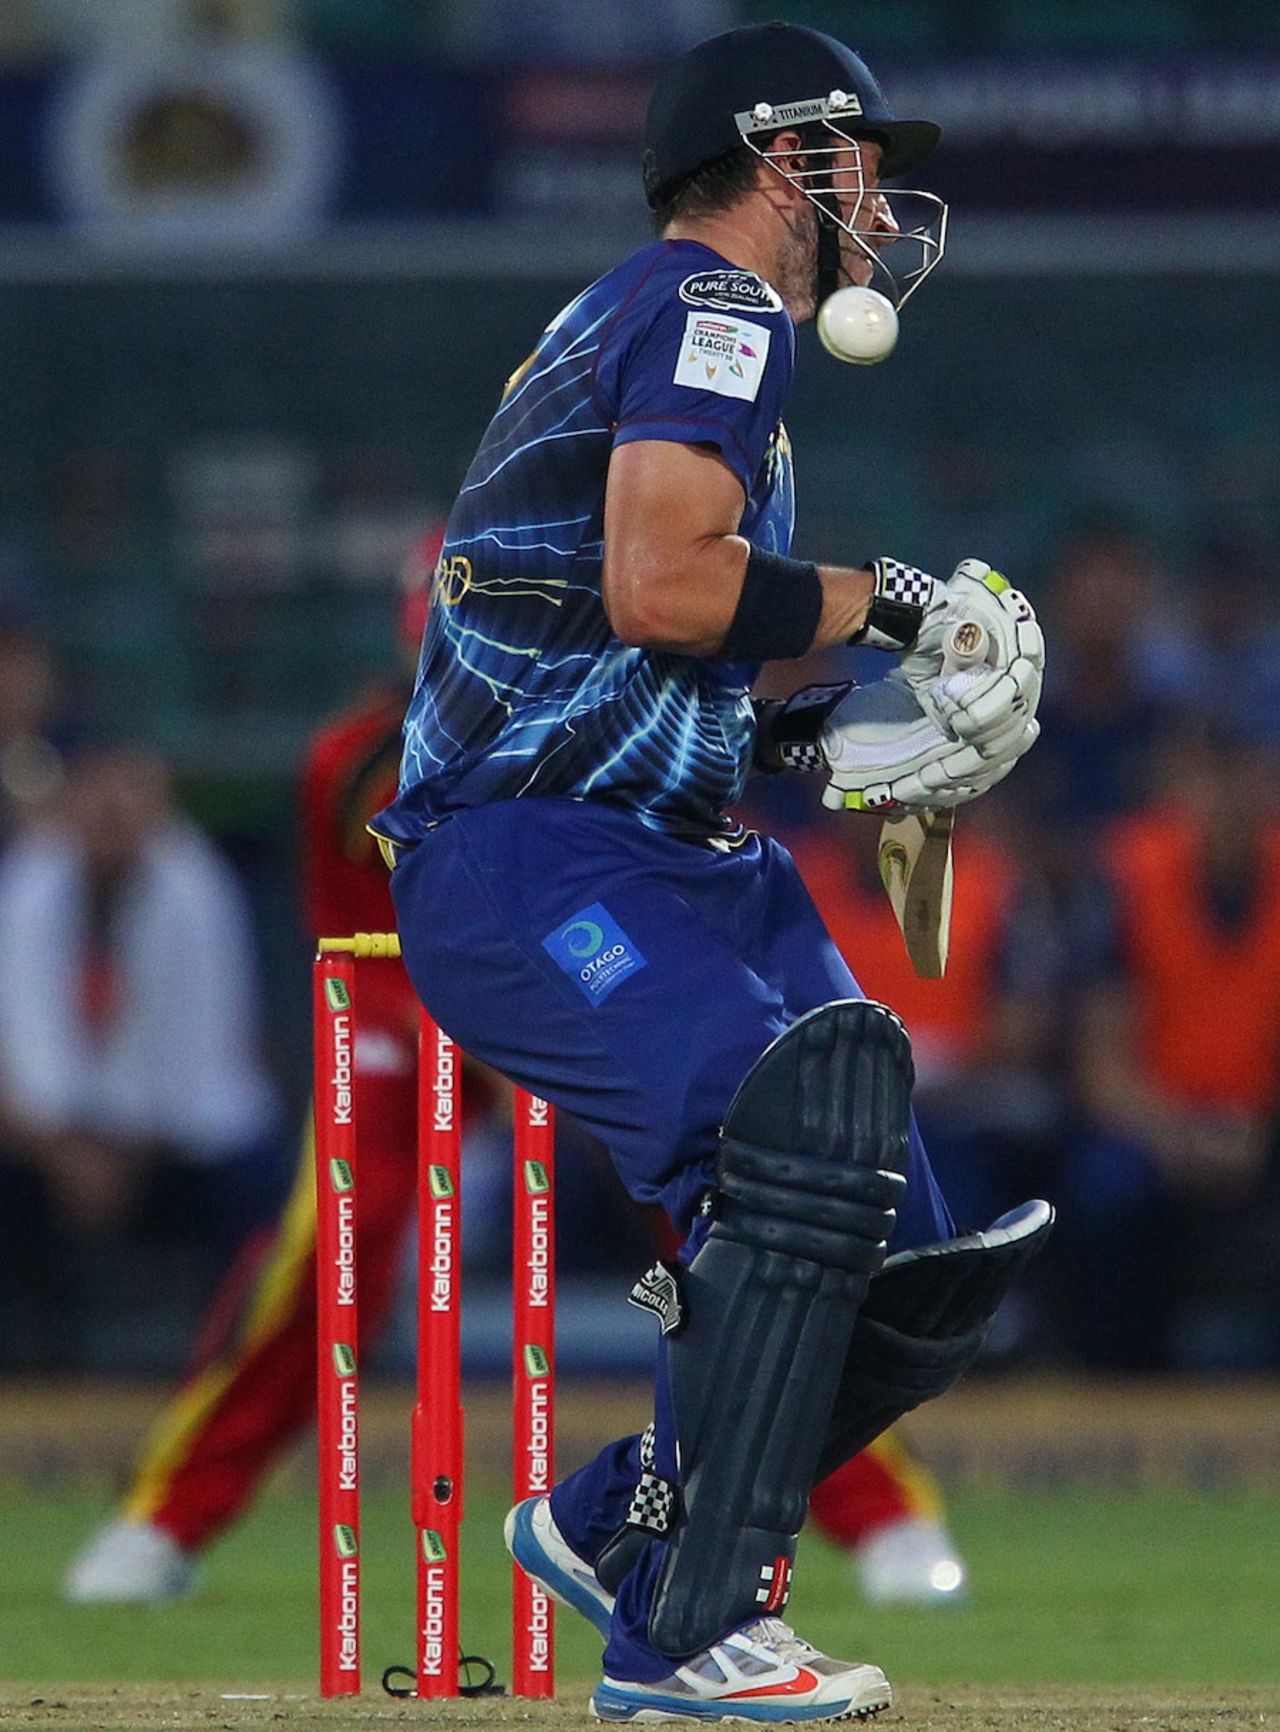 Hamish Rutherford was a hit by a bouncer from Hardus Viljoen, Lions v Otago Volts, Group A, Champions League 2013, Jaipur, September 29, 2013